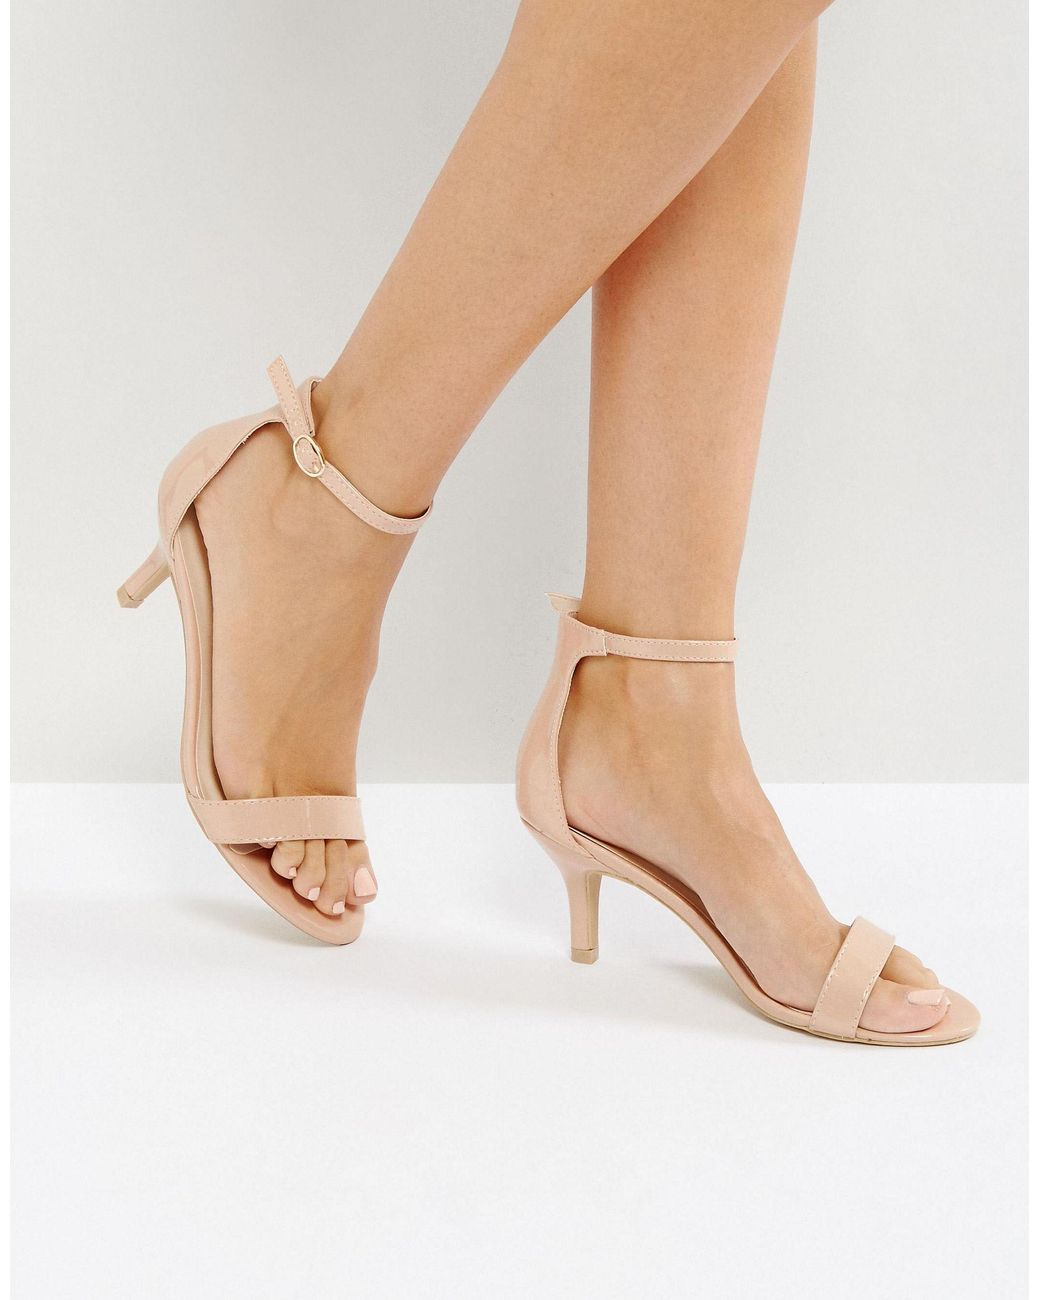 Glamorous Nude Barely There Kitten Heeled Sandals in Natural | Lyst  Australia